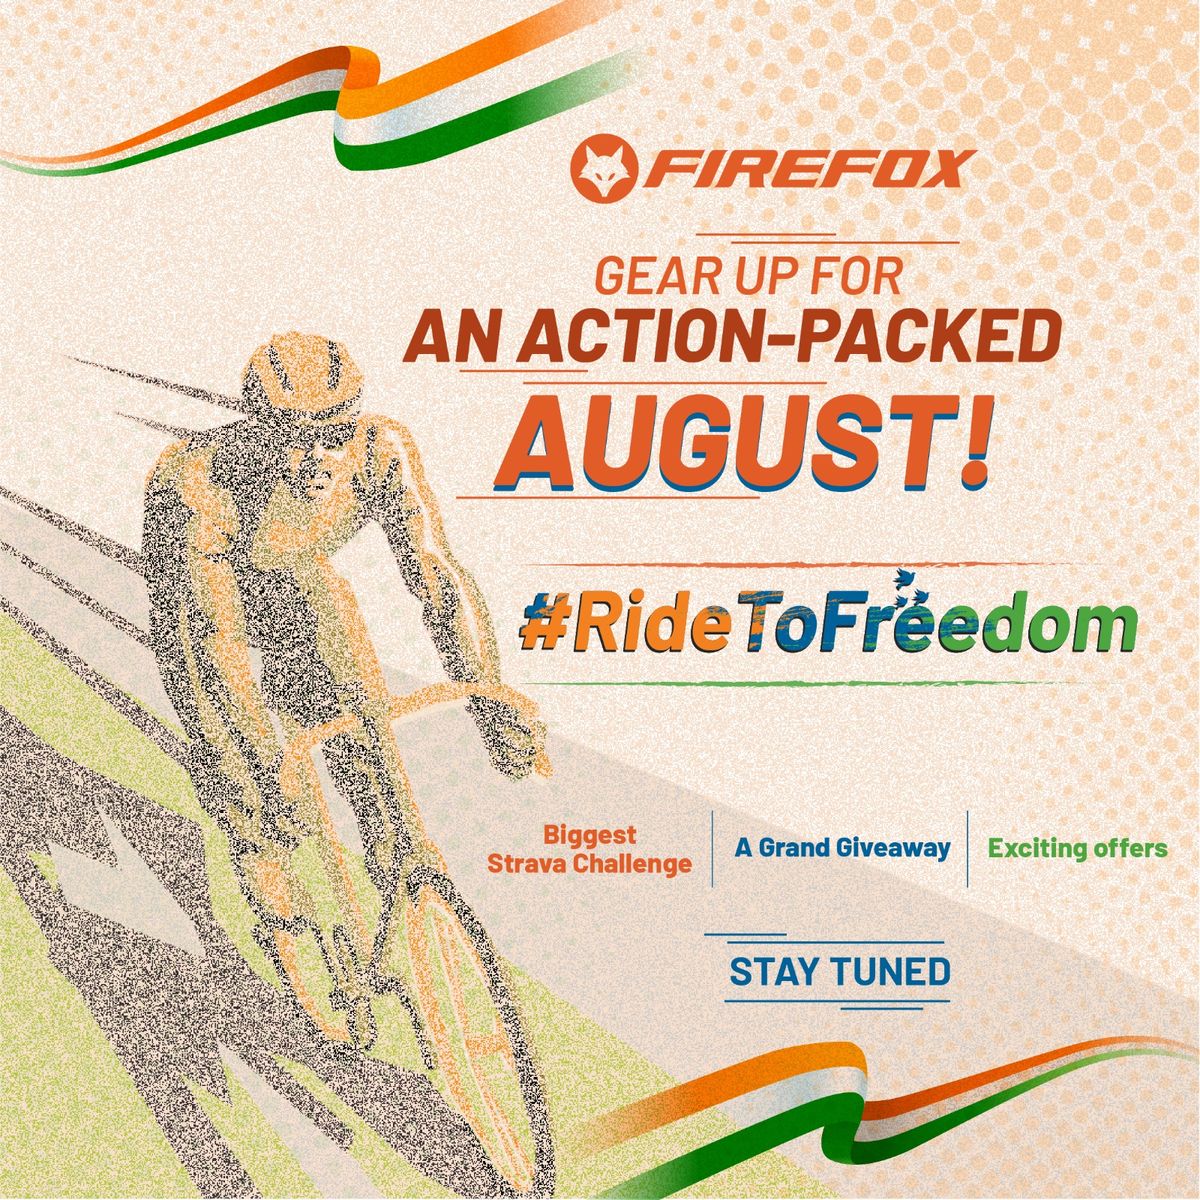 Set Your Spirit Free with "The Ride To Freedom" - Firefox Bikes' Independence Day Campaign